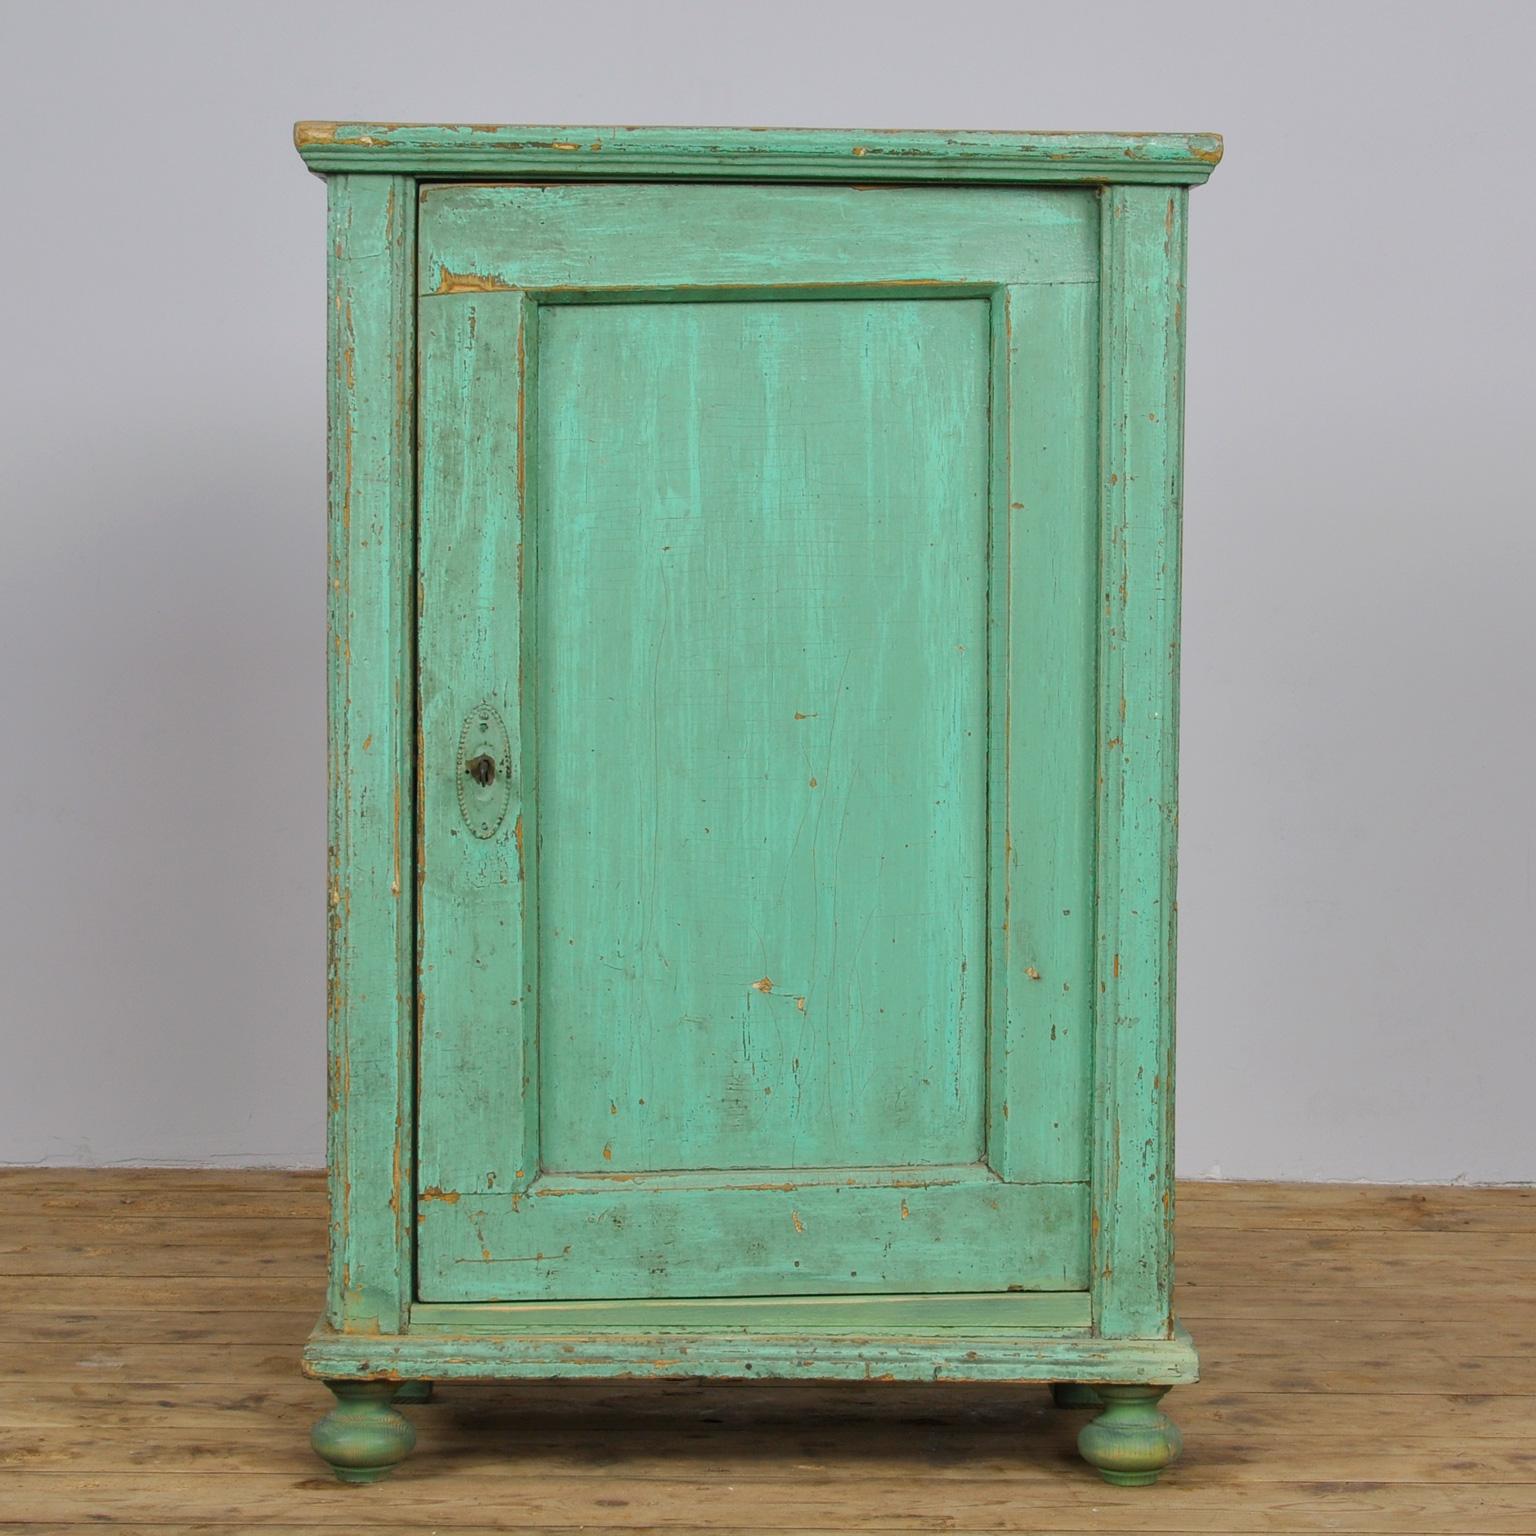 Nice pine cabinet from the 1930s With on the inside two shelves. Original paint.